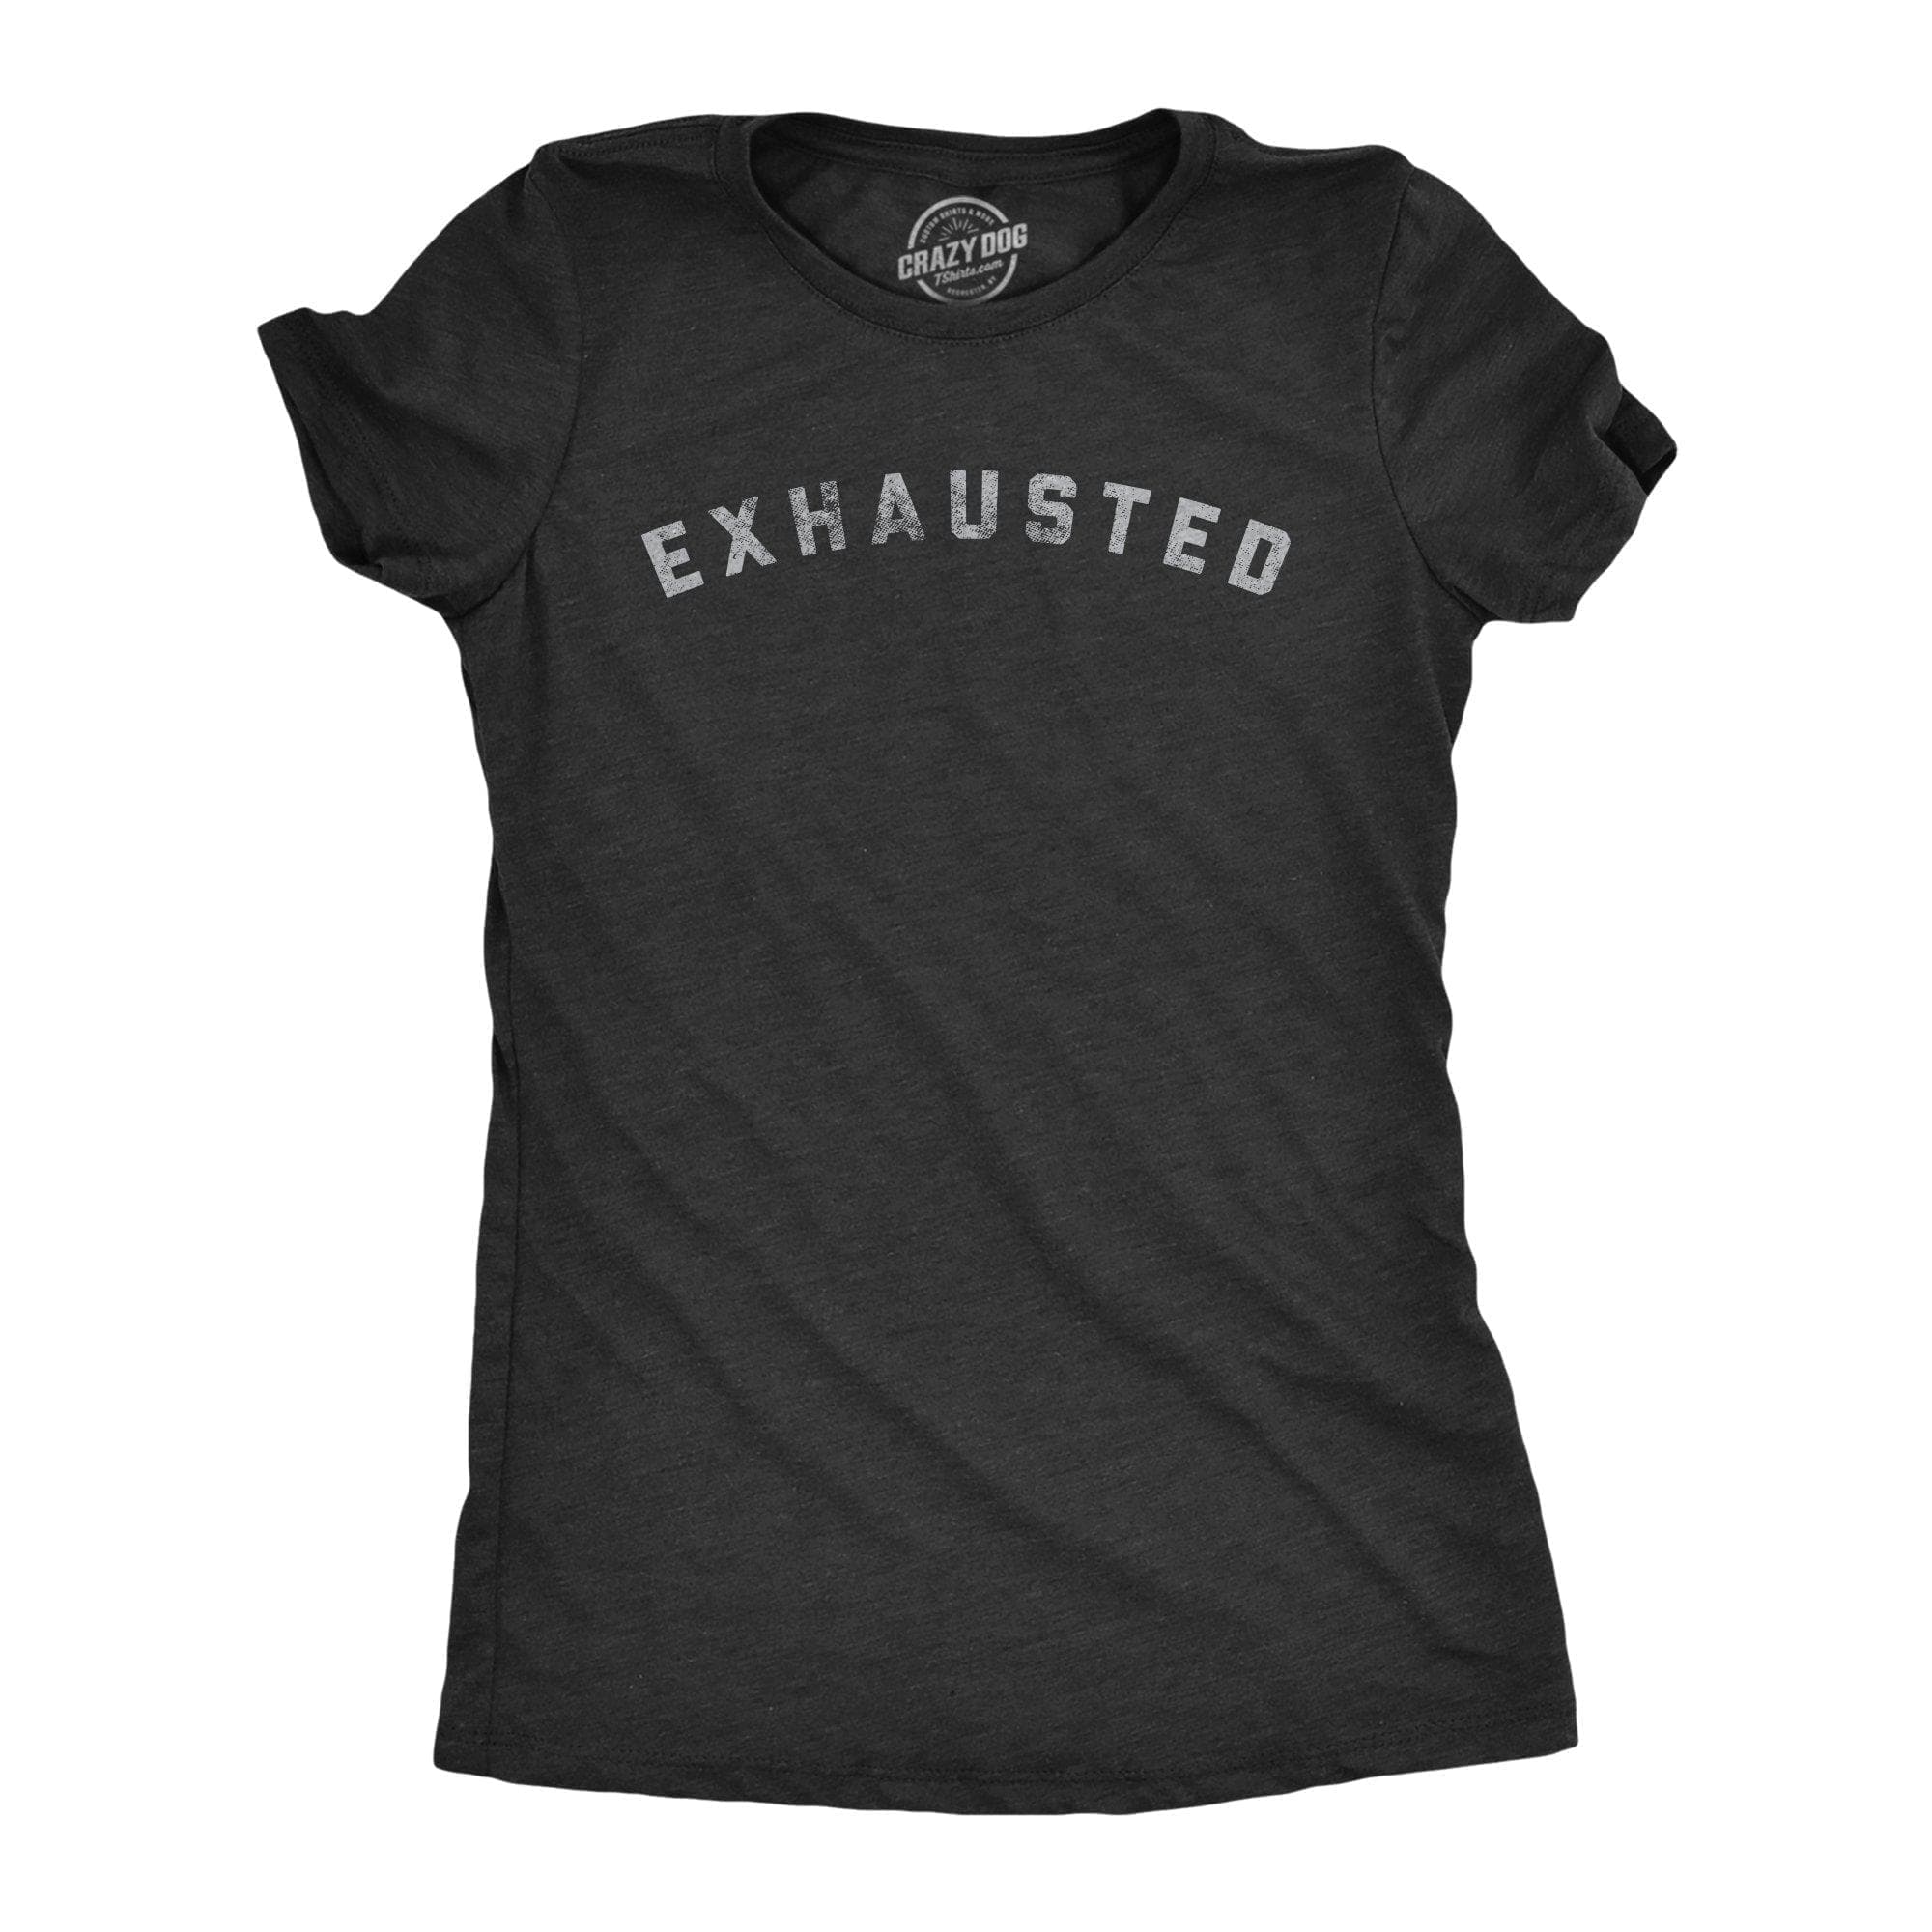 Exhausted Women's Tshirt - Crazy Dog T-Shirts